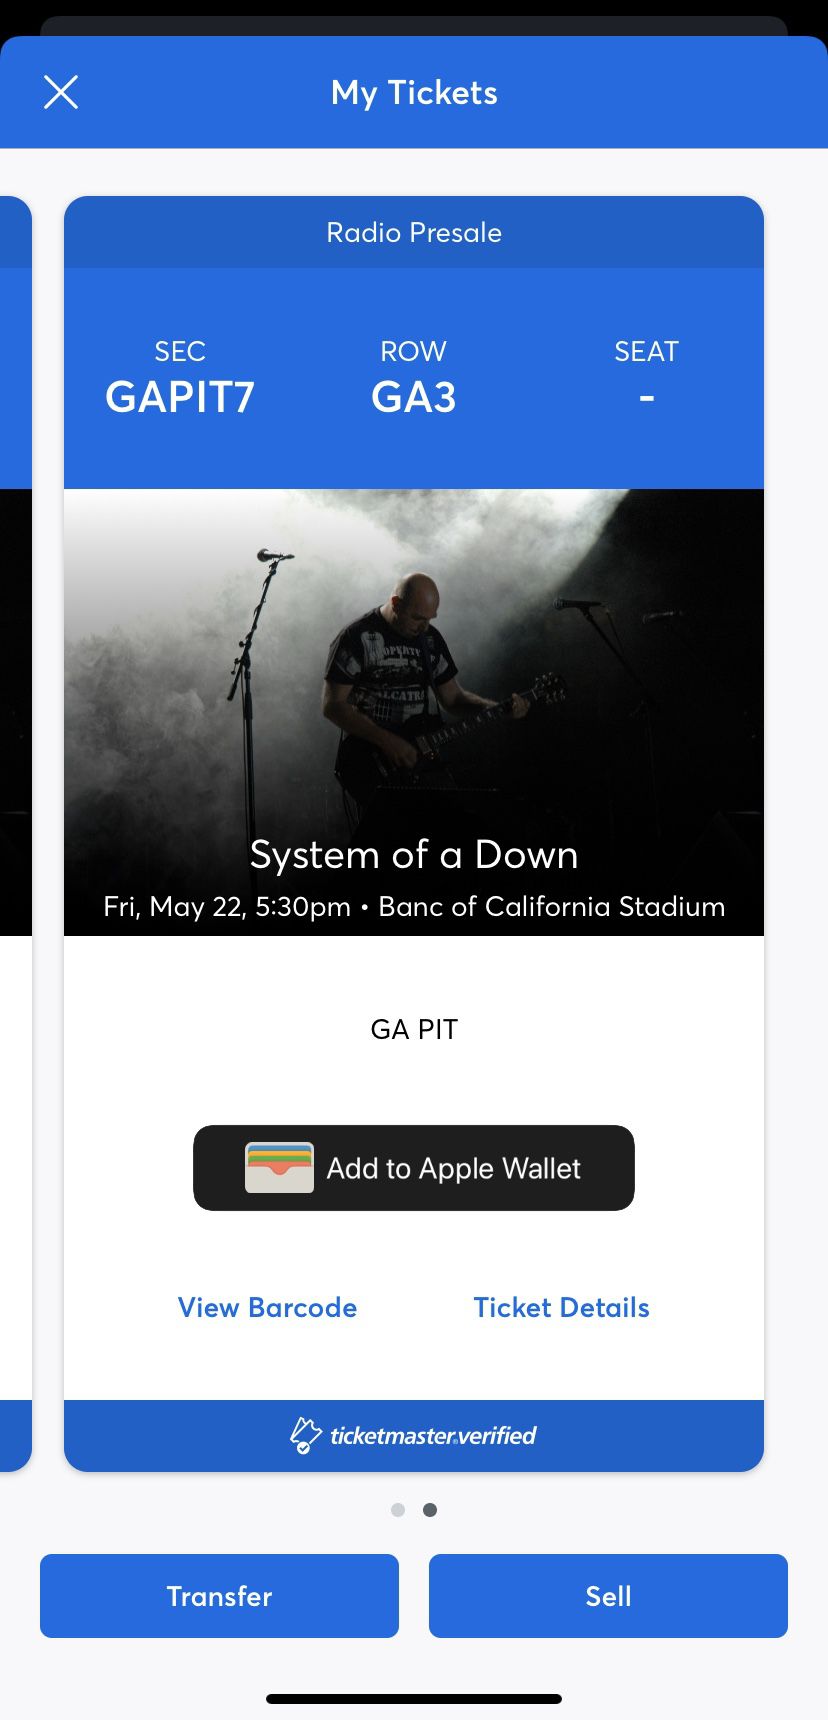 System of a Down tickets